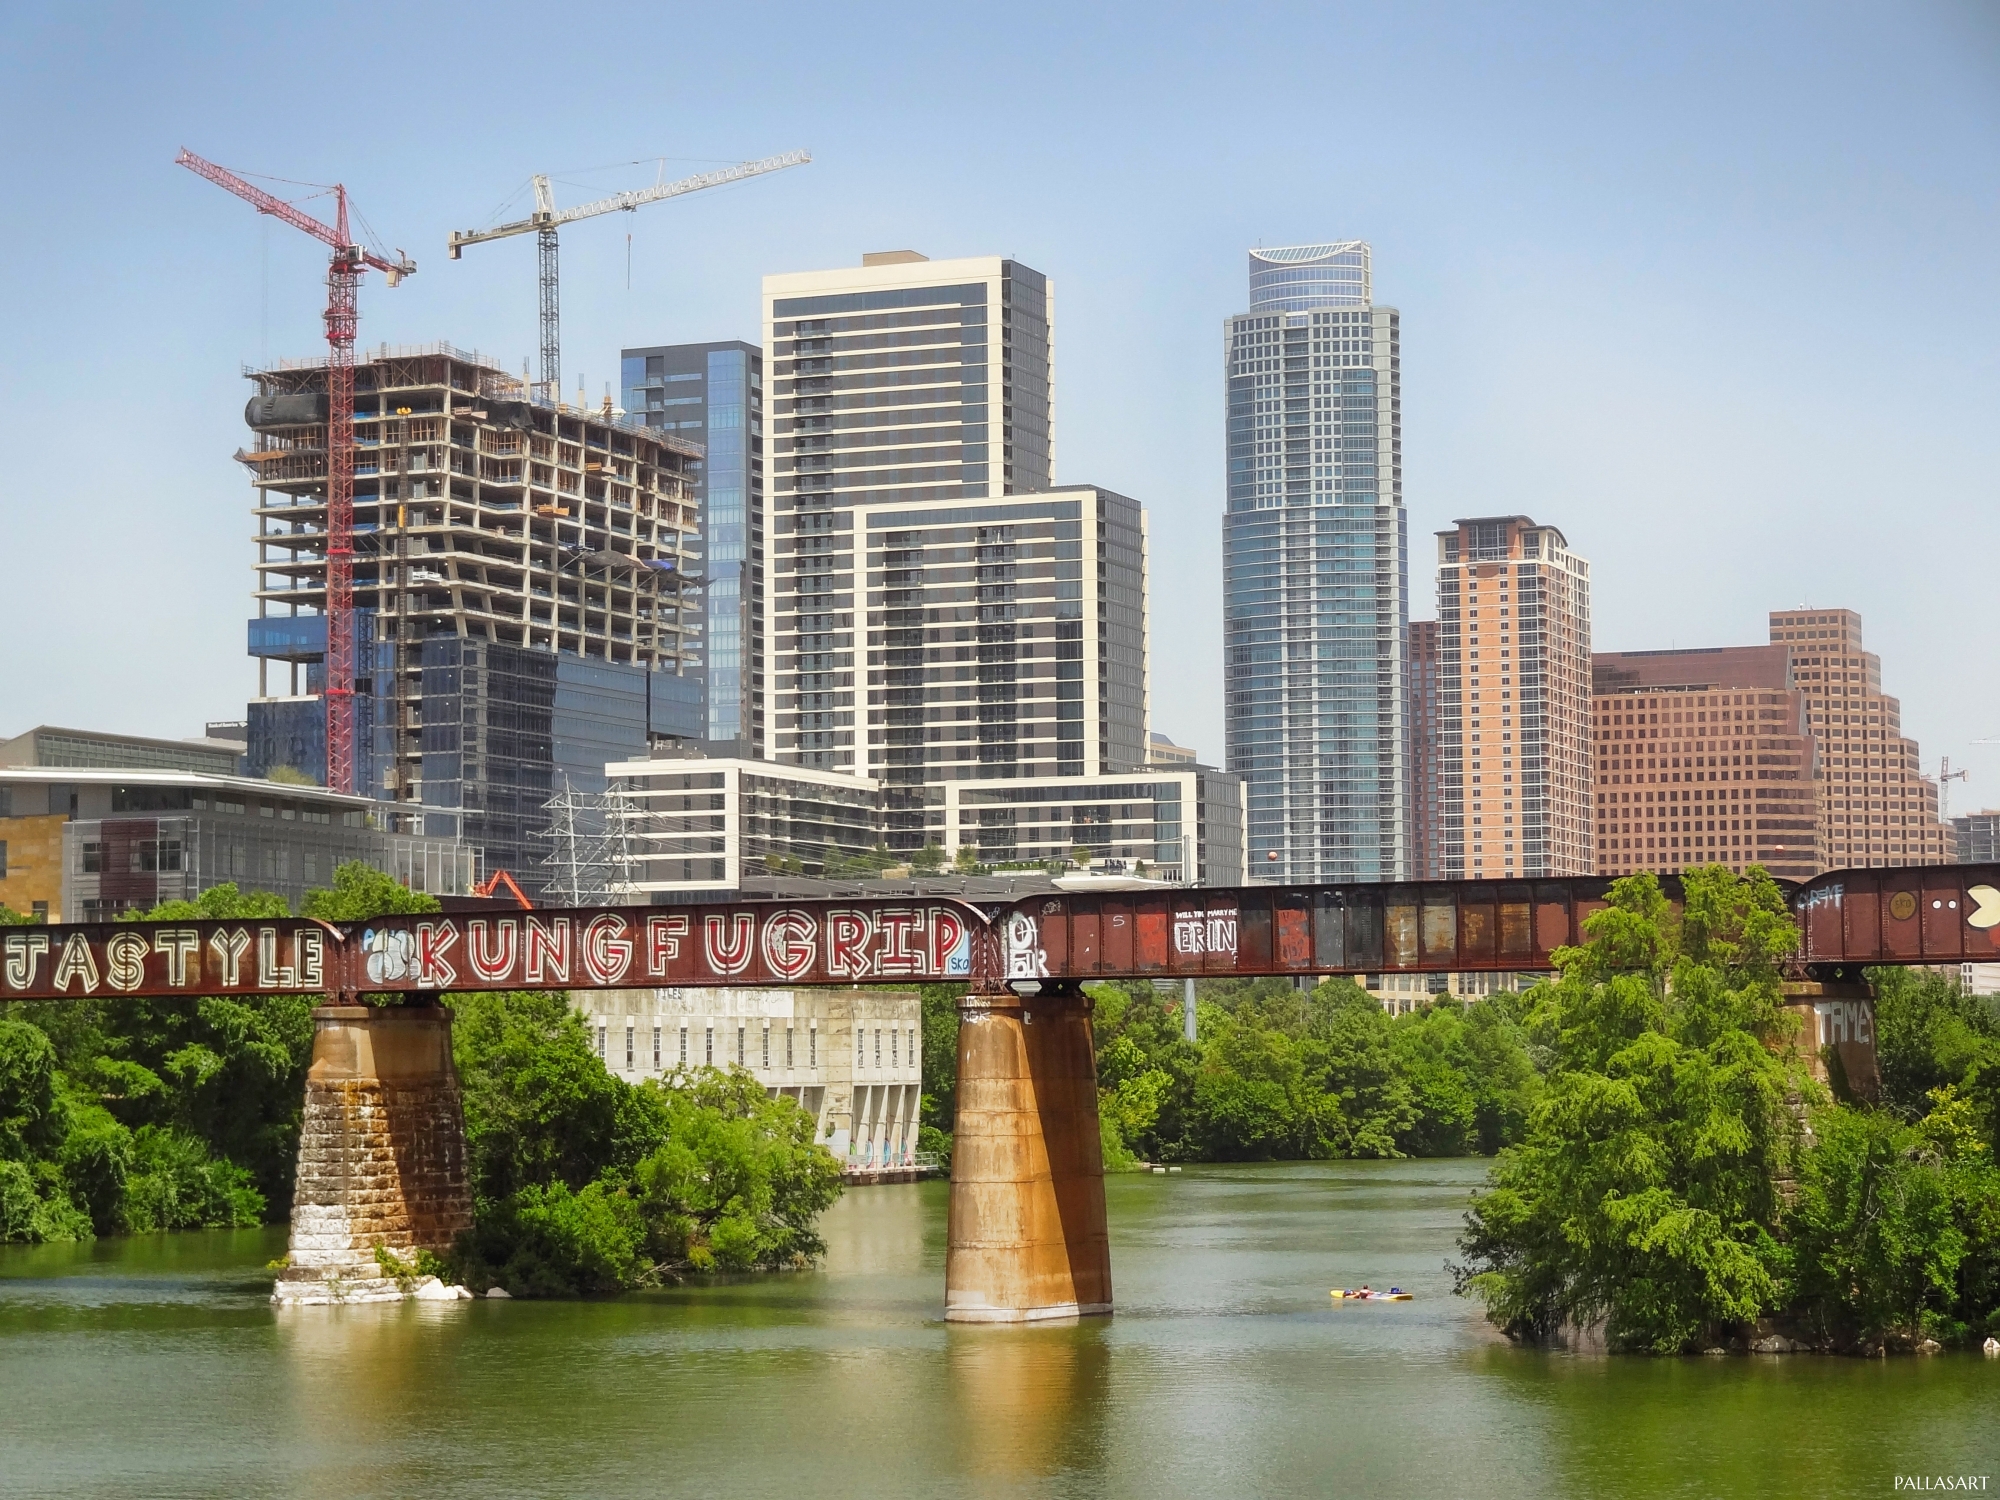 Austin Downtown Skyline Growing with Construction